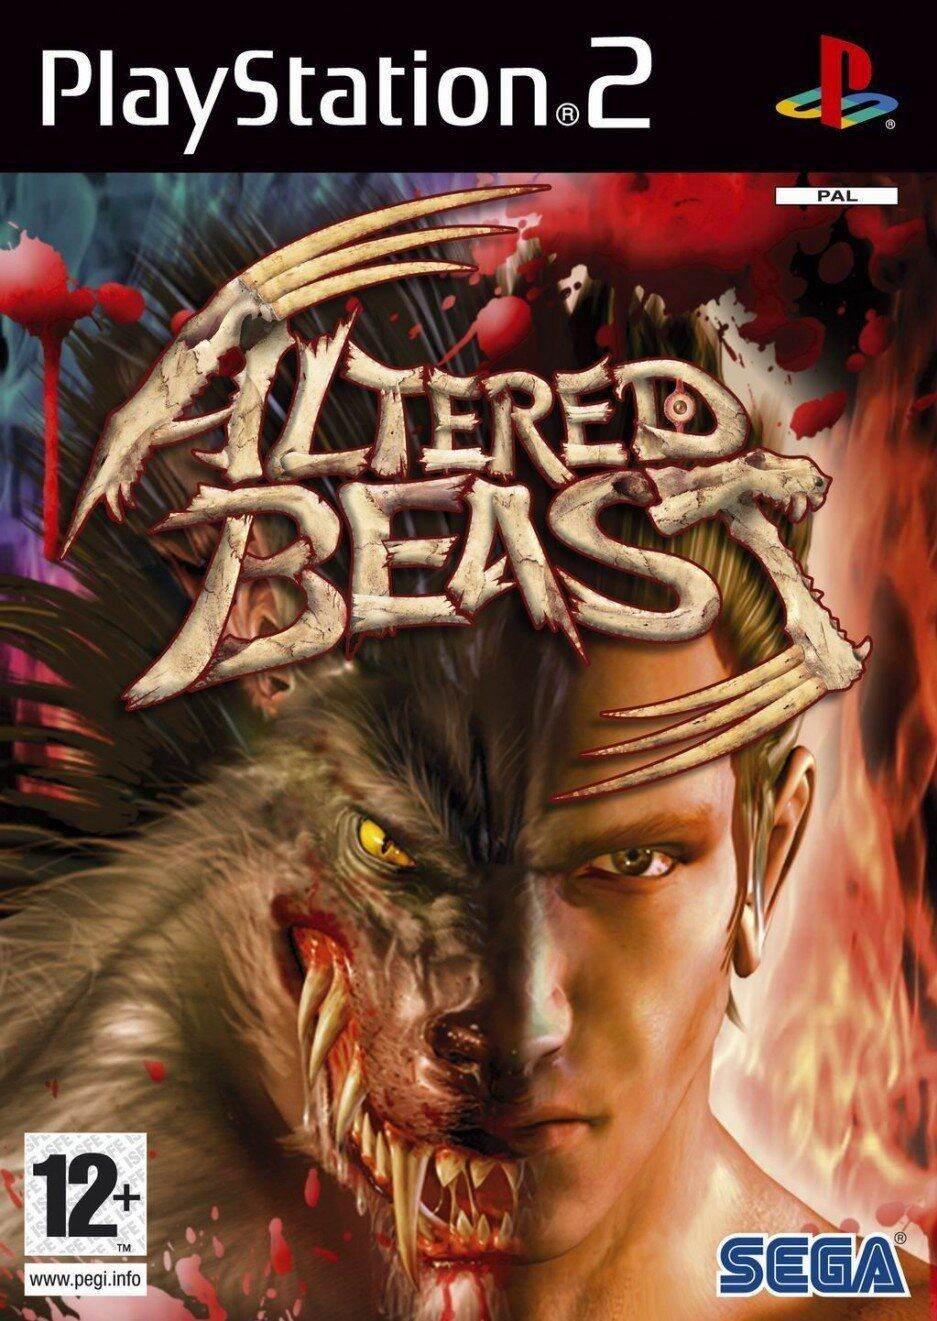 [HCM]Game PS2 altered beast ( Game đi cảnh PS2 )